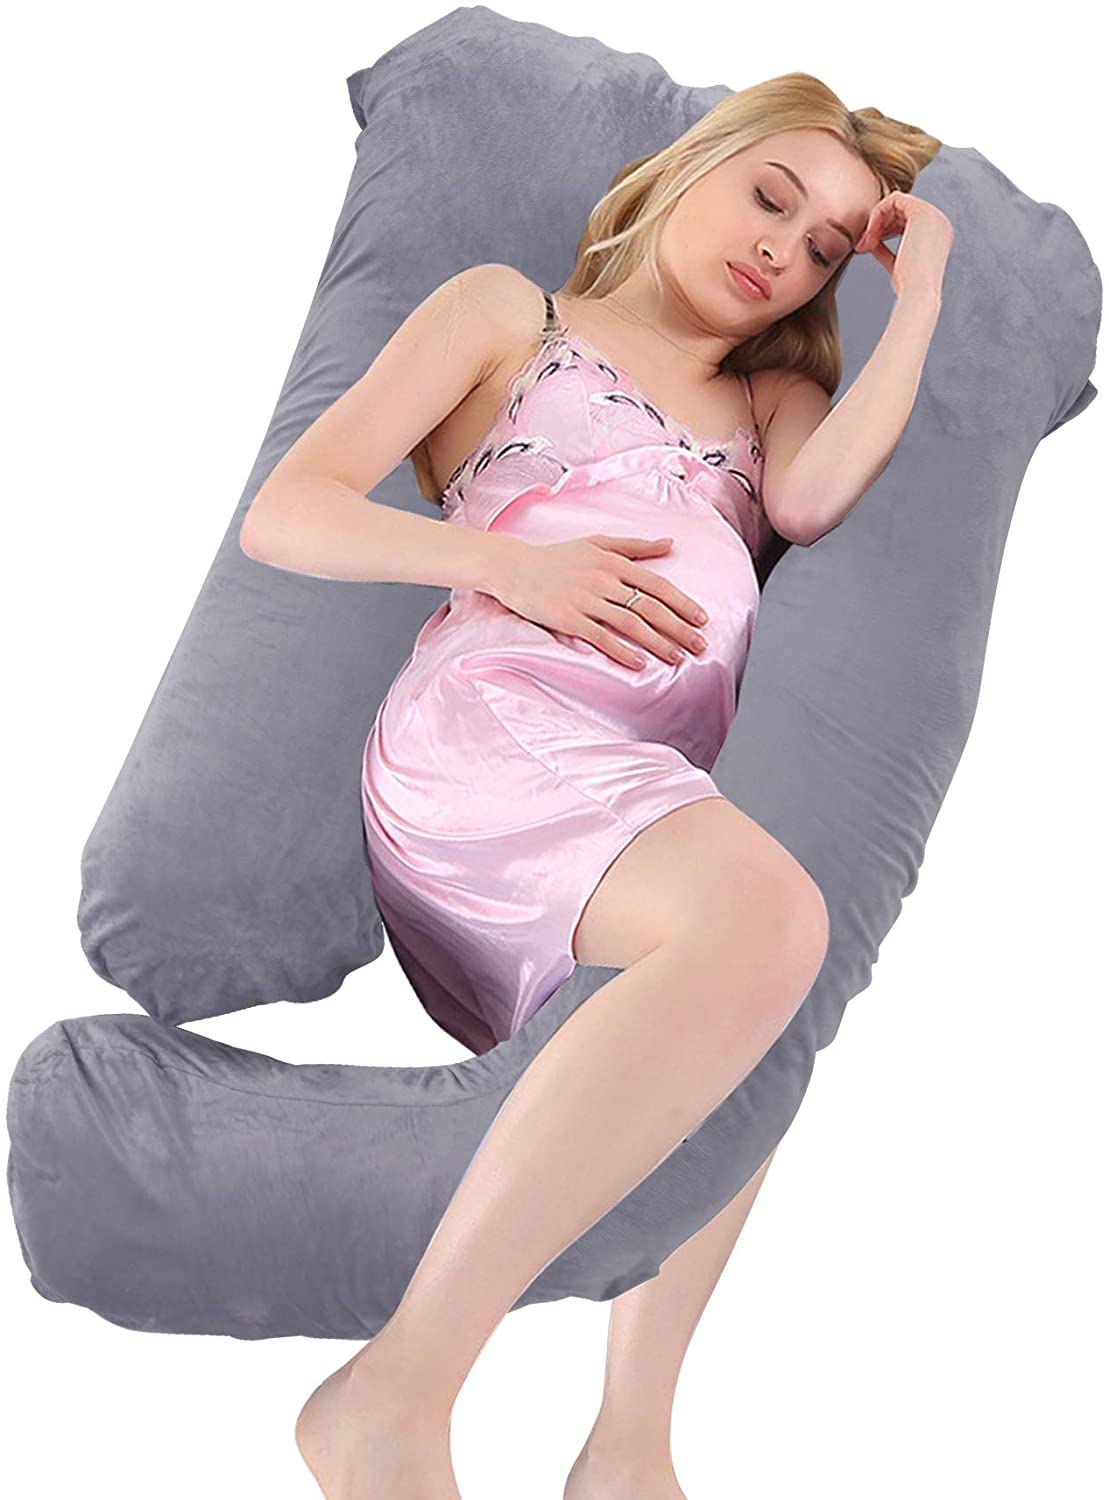 J/U/C-Shape Pregnancy Pillows 55 Inch Maternity Pillow with Washable Velvet Cover Nursing Support Cushion,Support for Back, Hips, Legs, Belly for Pregnant Women Side Sleeping